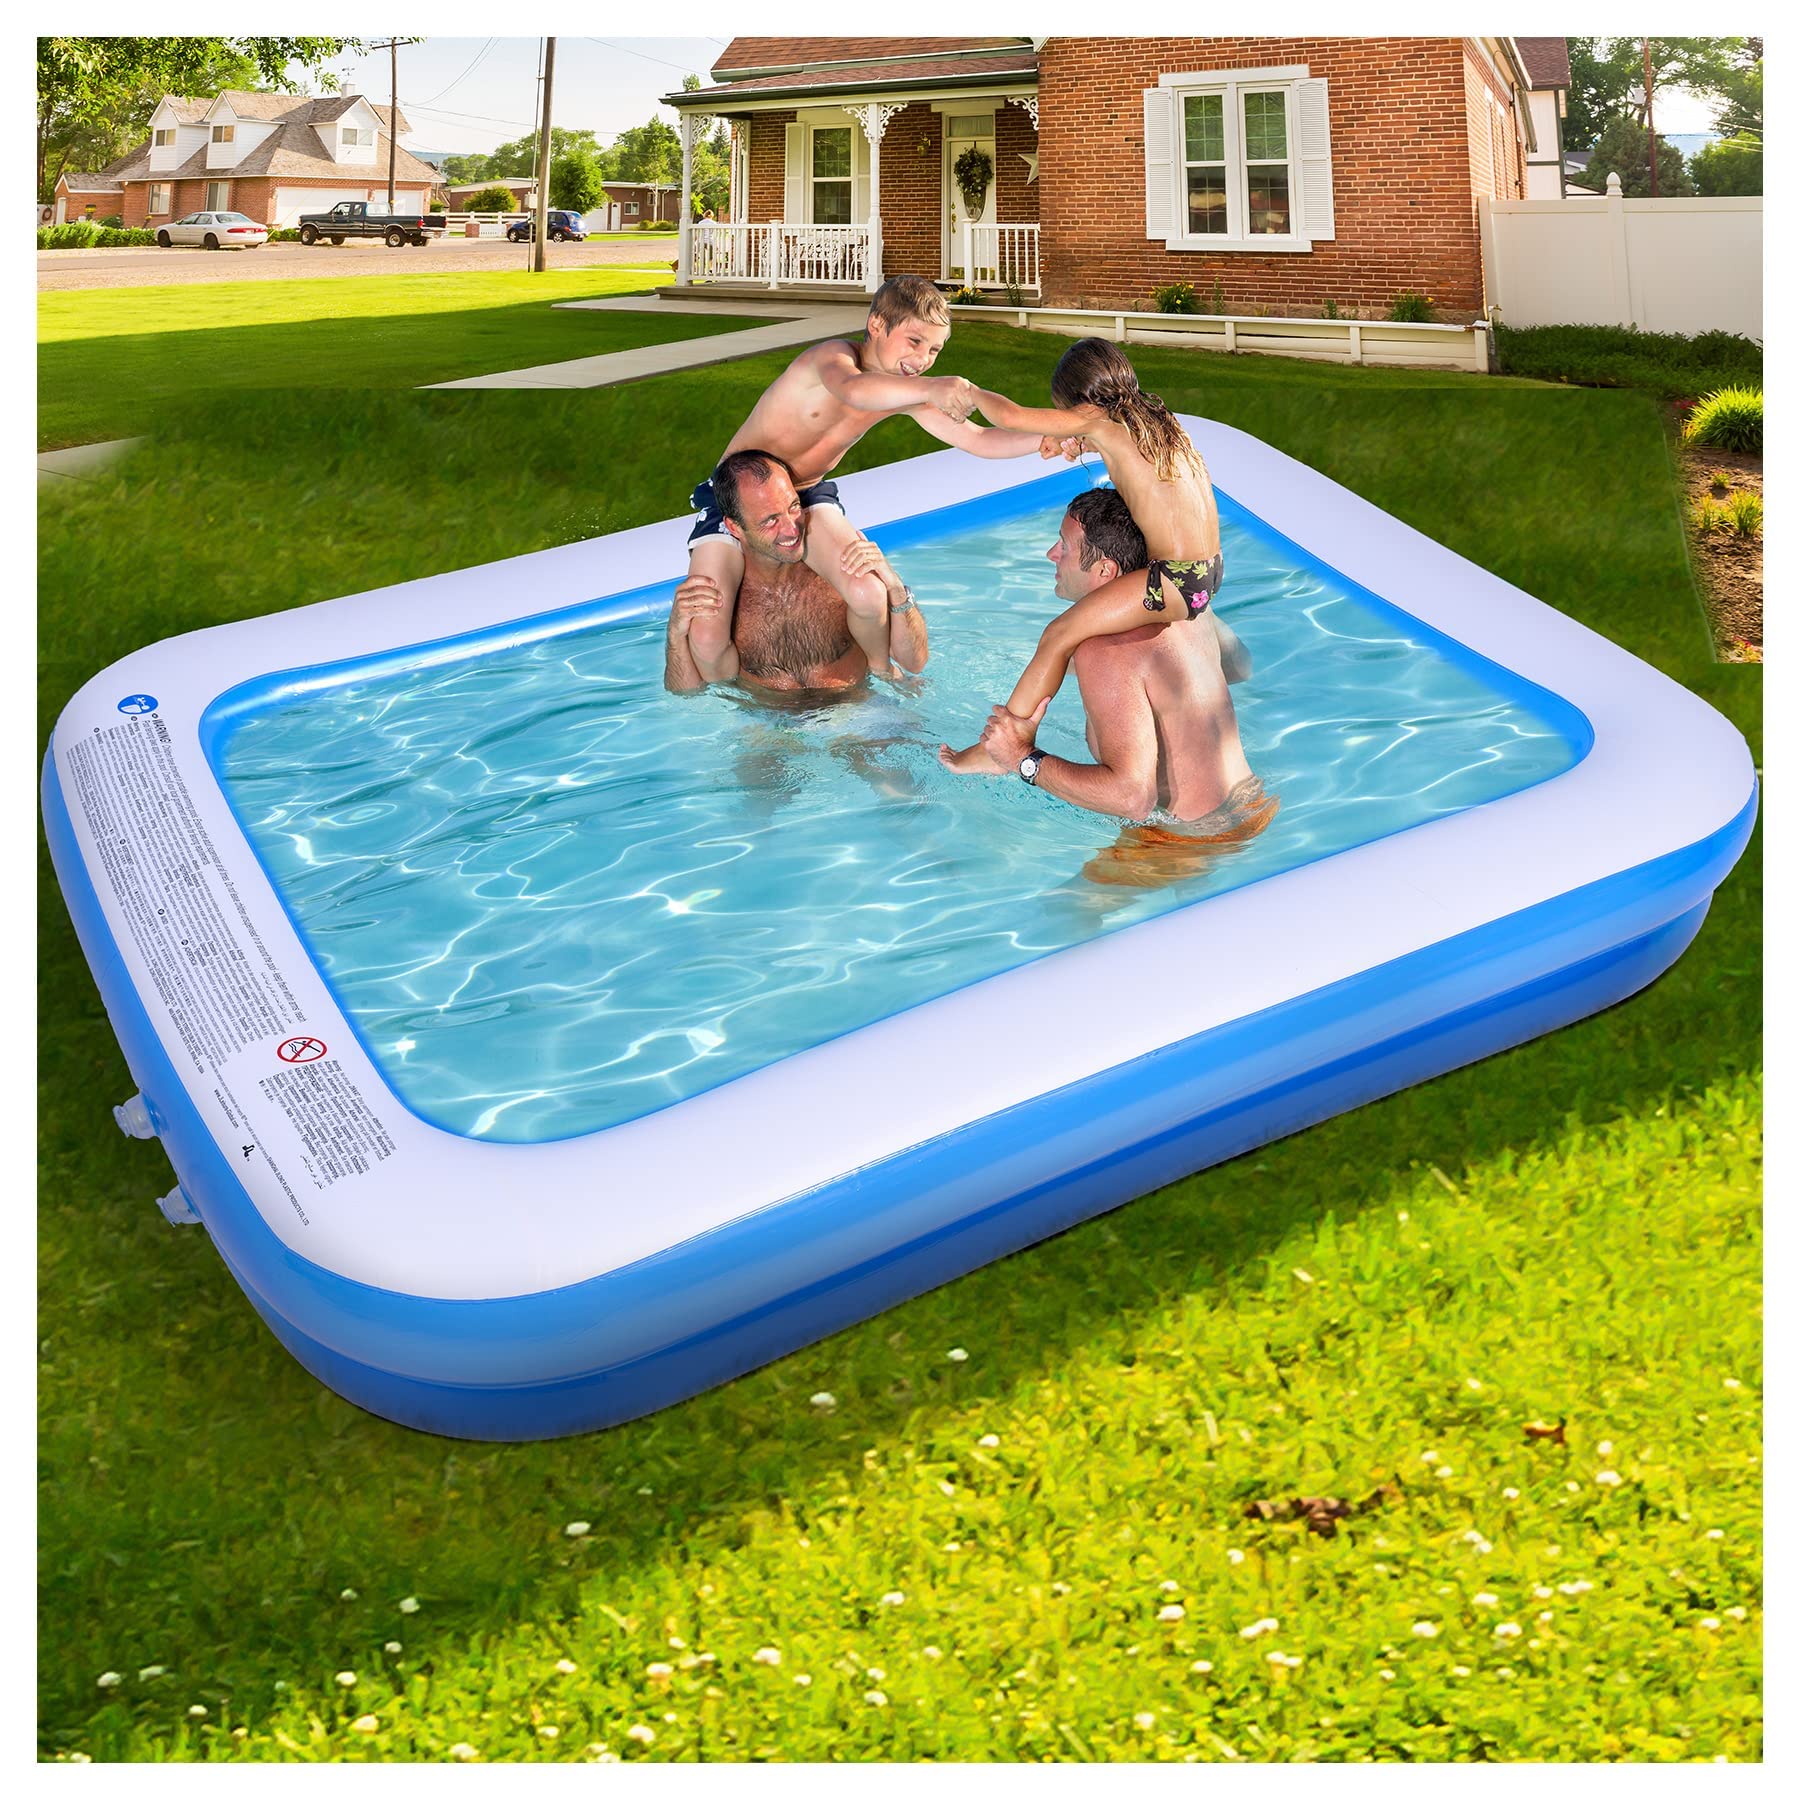 AMOCANE Inflatable Swimming Pool with Pump L120 x W 72 x H 20 in Full-Sized Family Pools Above Ground for Baby Kids Kiddi